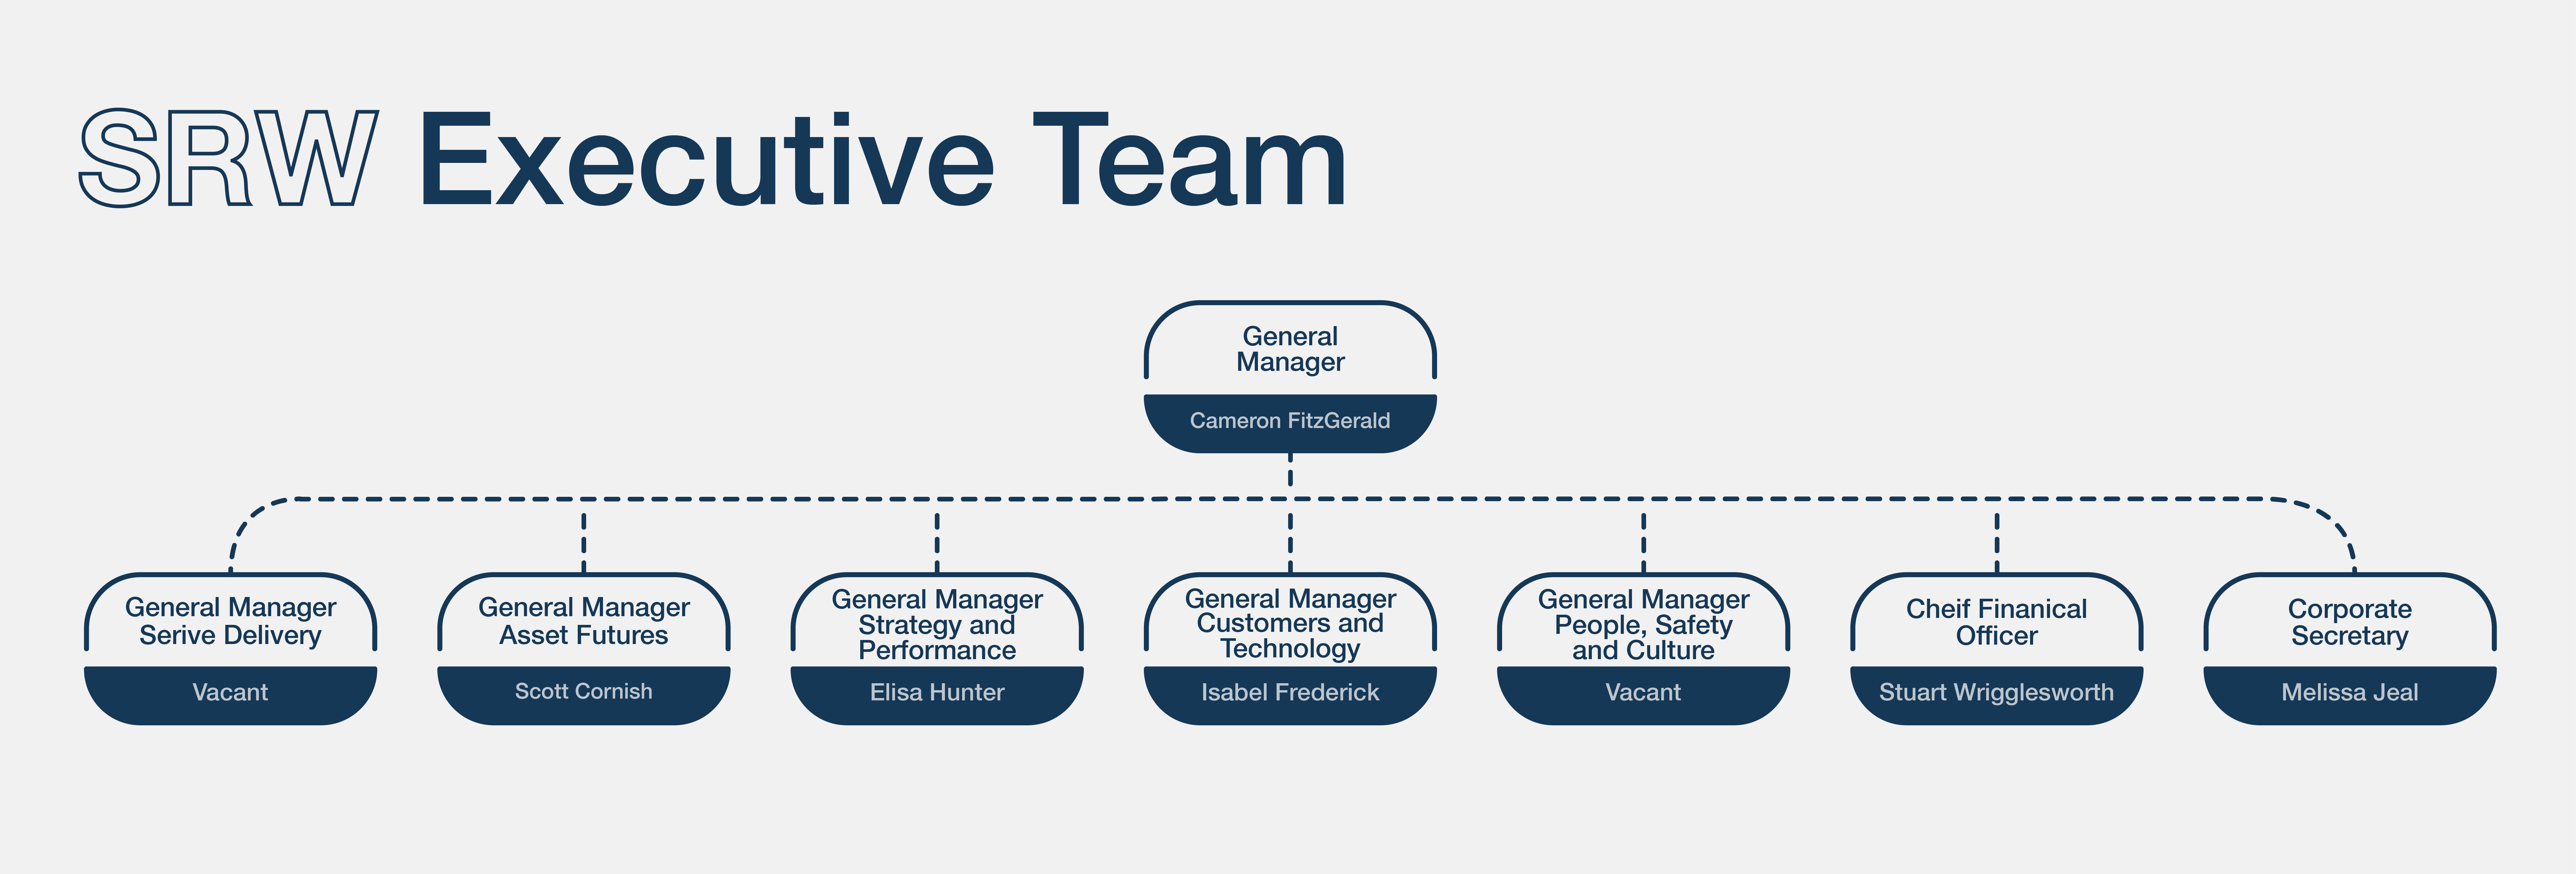 Organistional chart of executive team